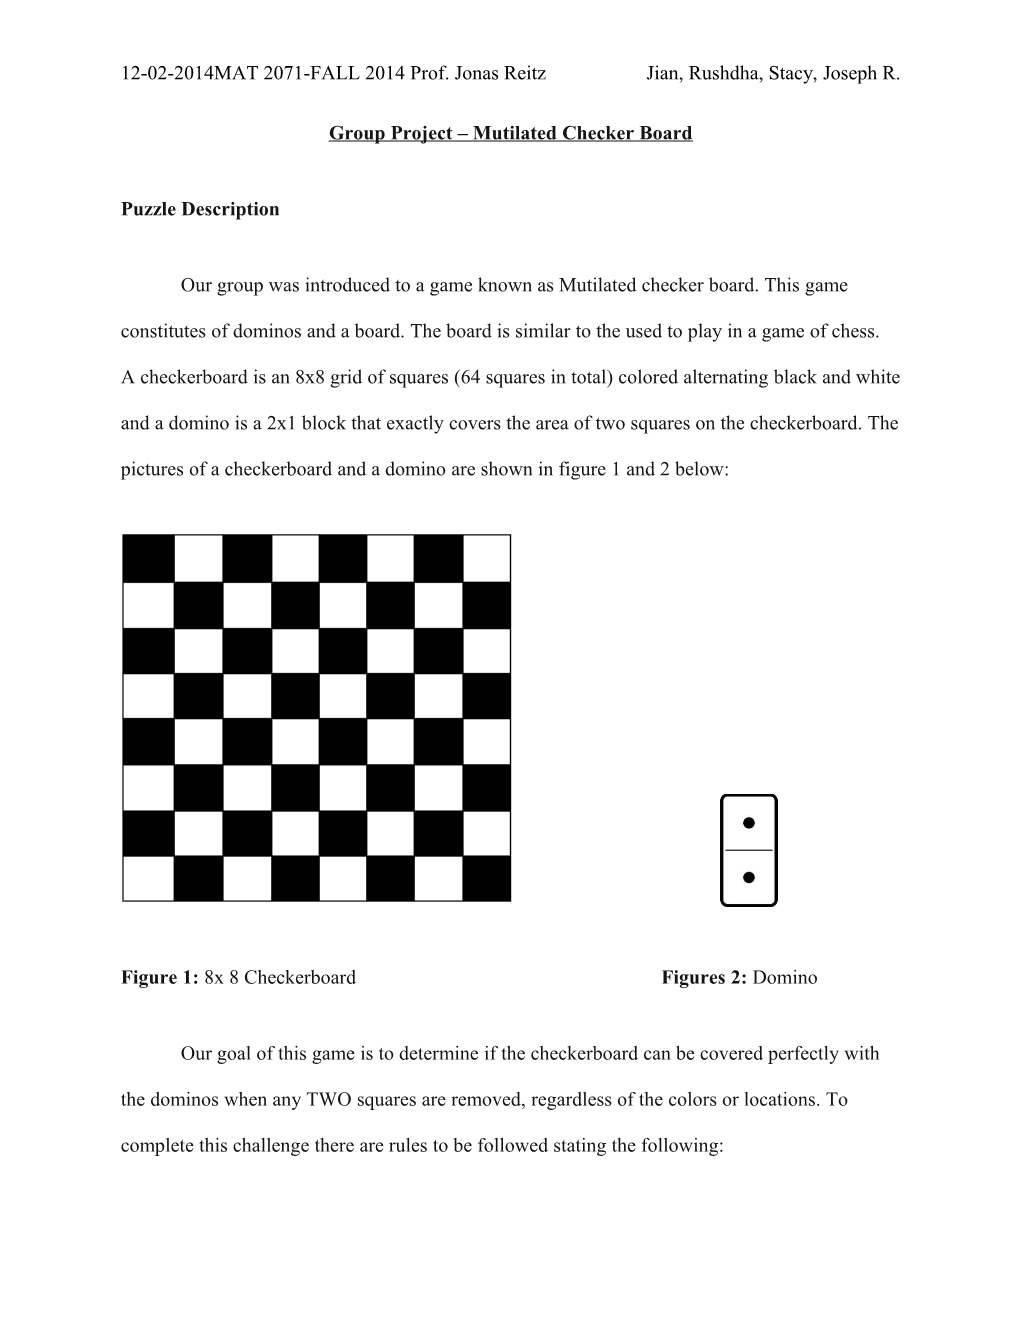 Group Project Mutilated Checker Board